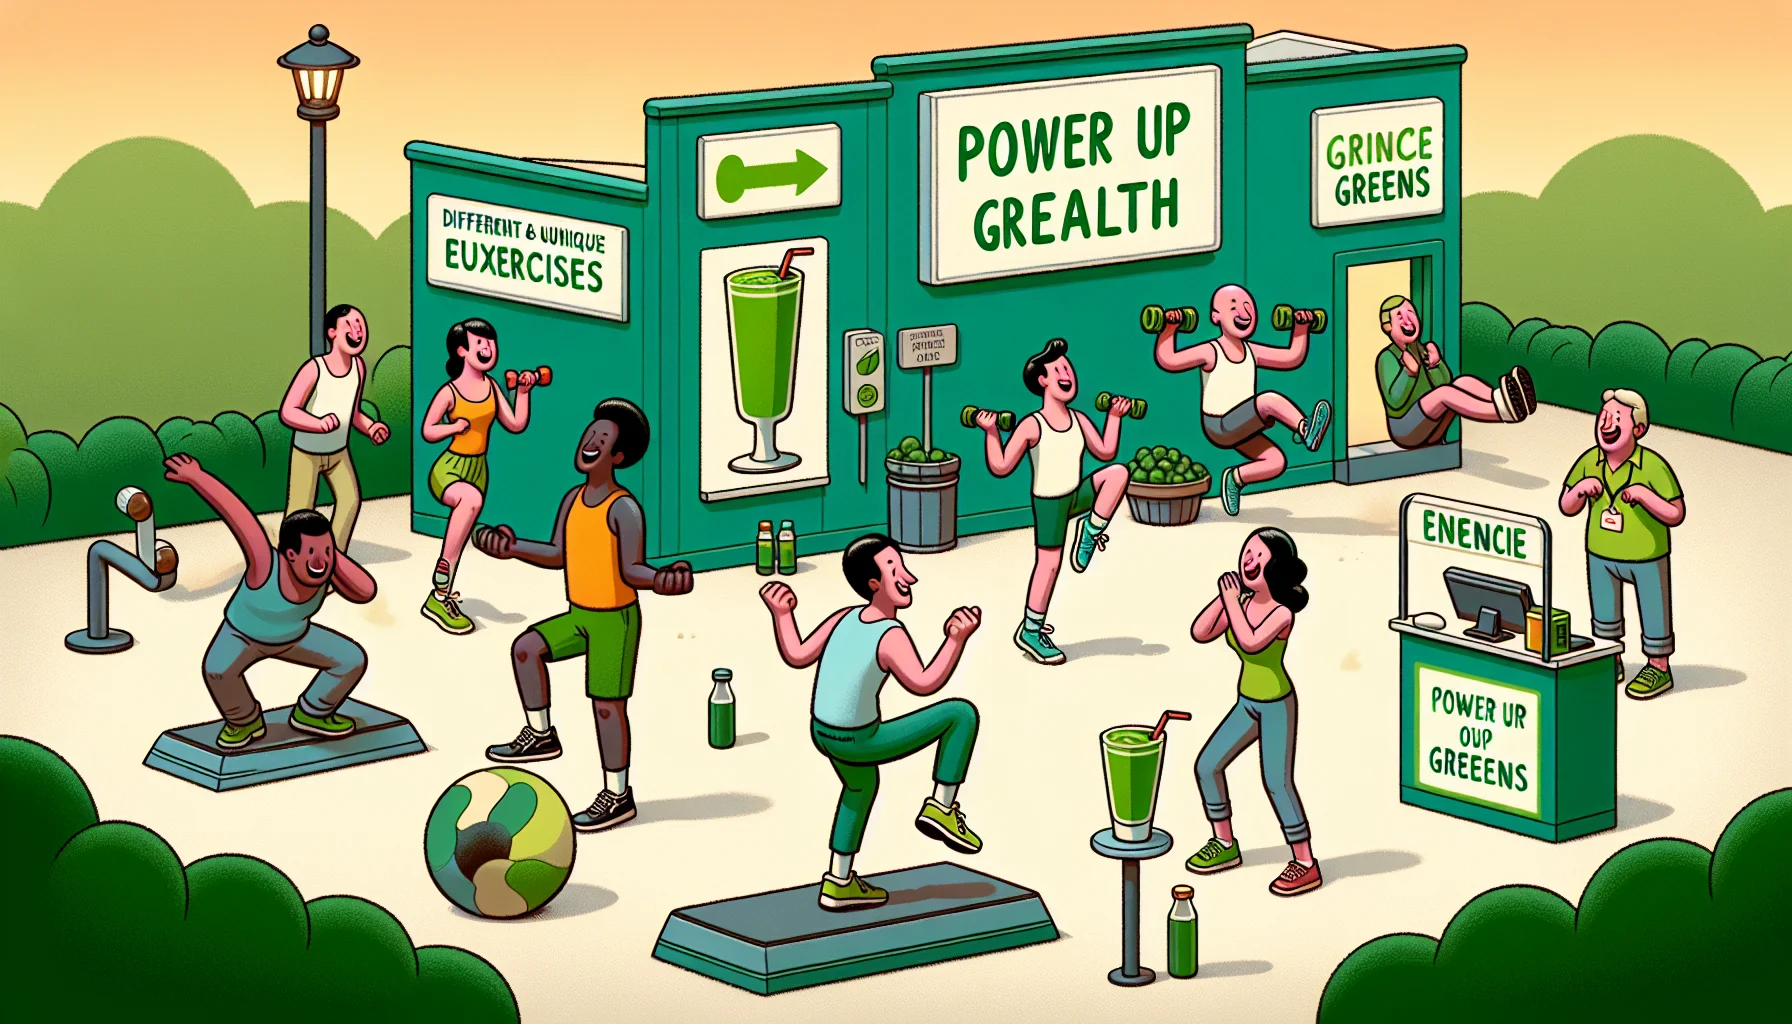 Create a humor-infused scenario that draws people to exercise, alluding to improved health. The setting features instruction signs for different fun and unique exercises, a glowing green smoothie stand labeled 'Power Up Greens', and people of varied descents and genders engaging in these exercises with laughter and enthusiasm. In the foreground, you see a Caucasian man attempting some challenging balance pose, an African woman joyfully skipping, a Hispanic male pumping some light dumbbells, and a Middle-Eastern woman trying aerobic steps. Each person's expressions show both the effort and the fun inherent in their activity.